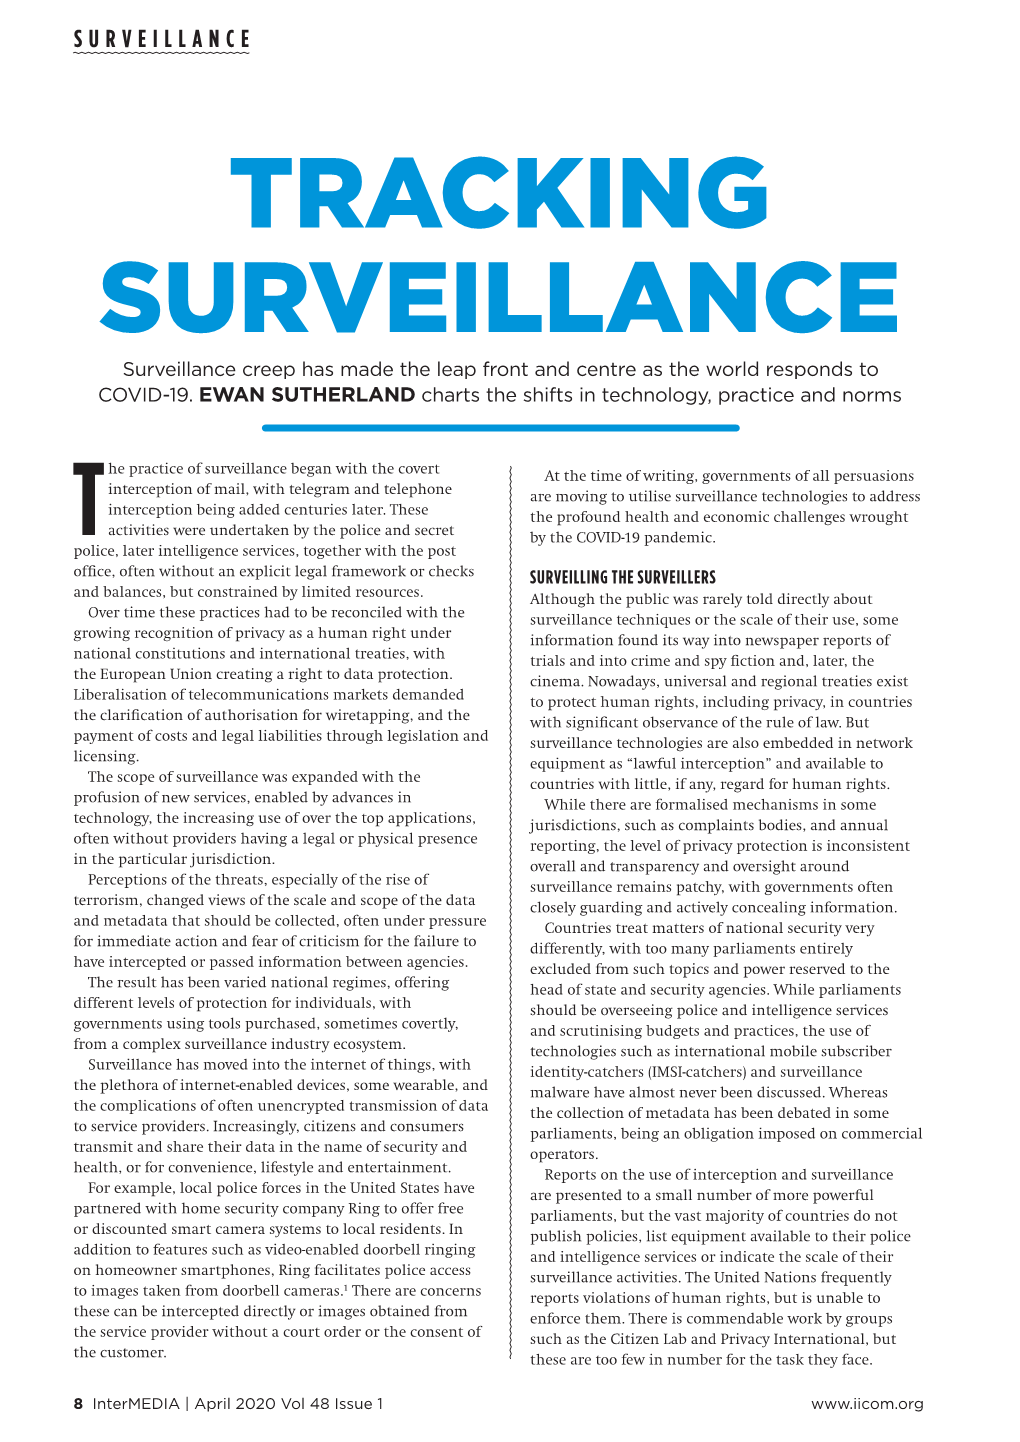 TRACKING SURVEILLANCE Surveillance Creep Has Made the Leap Front and Centre As the World Responds to COVID-19